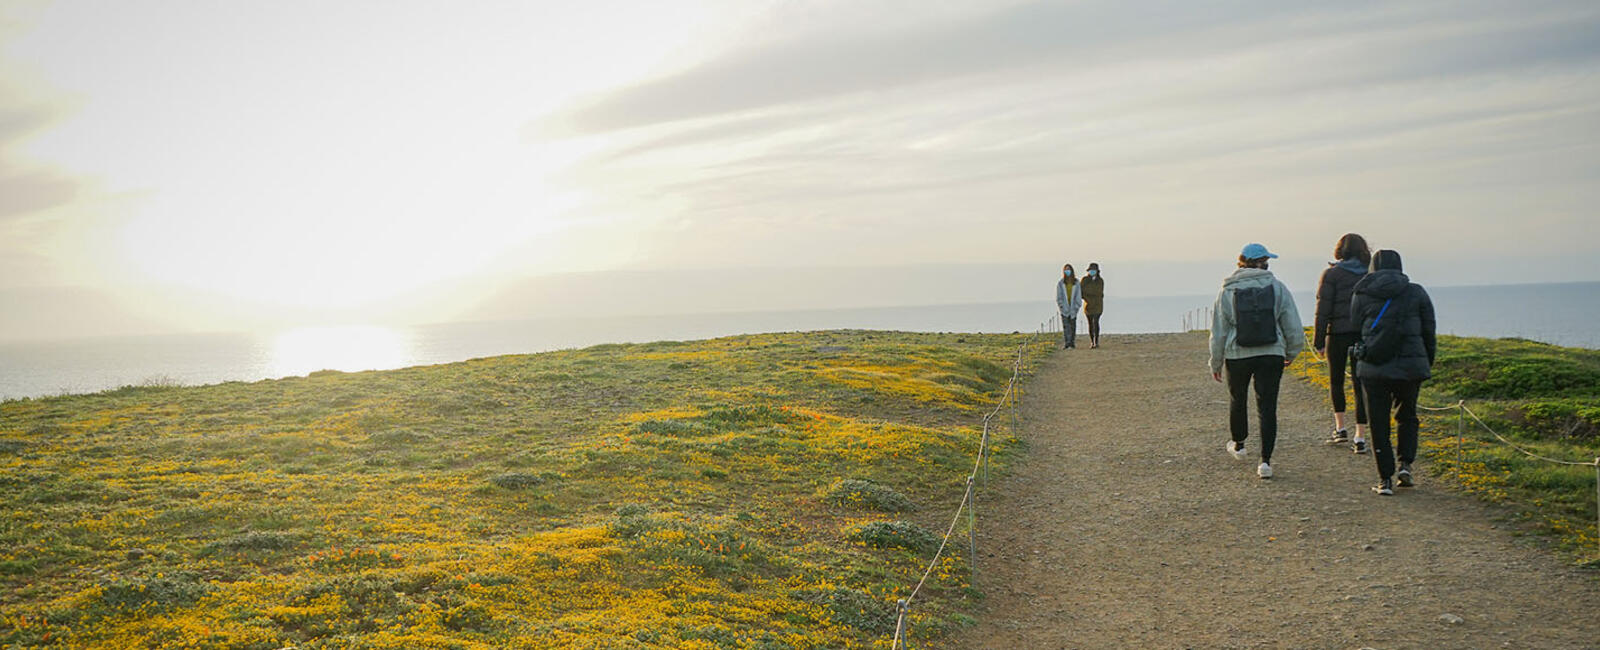 People hiking at Mori Point in San Mateo County.